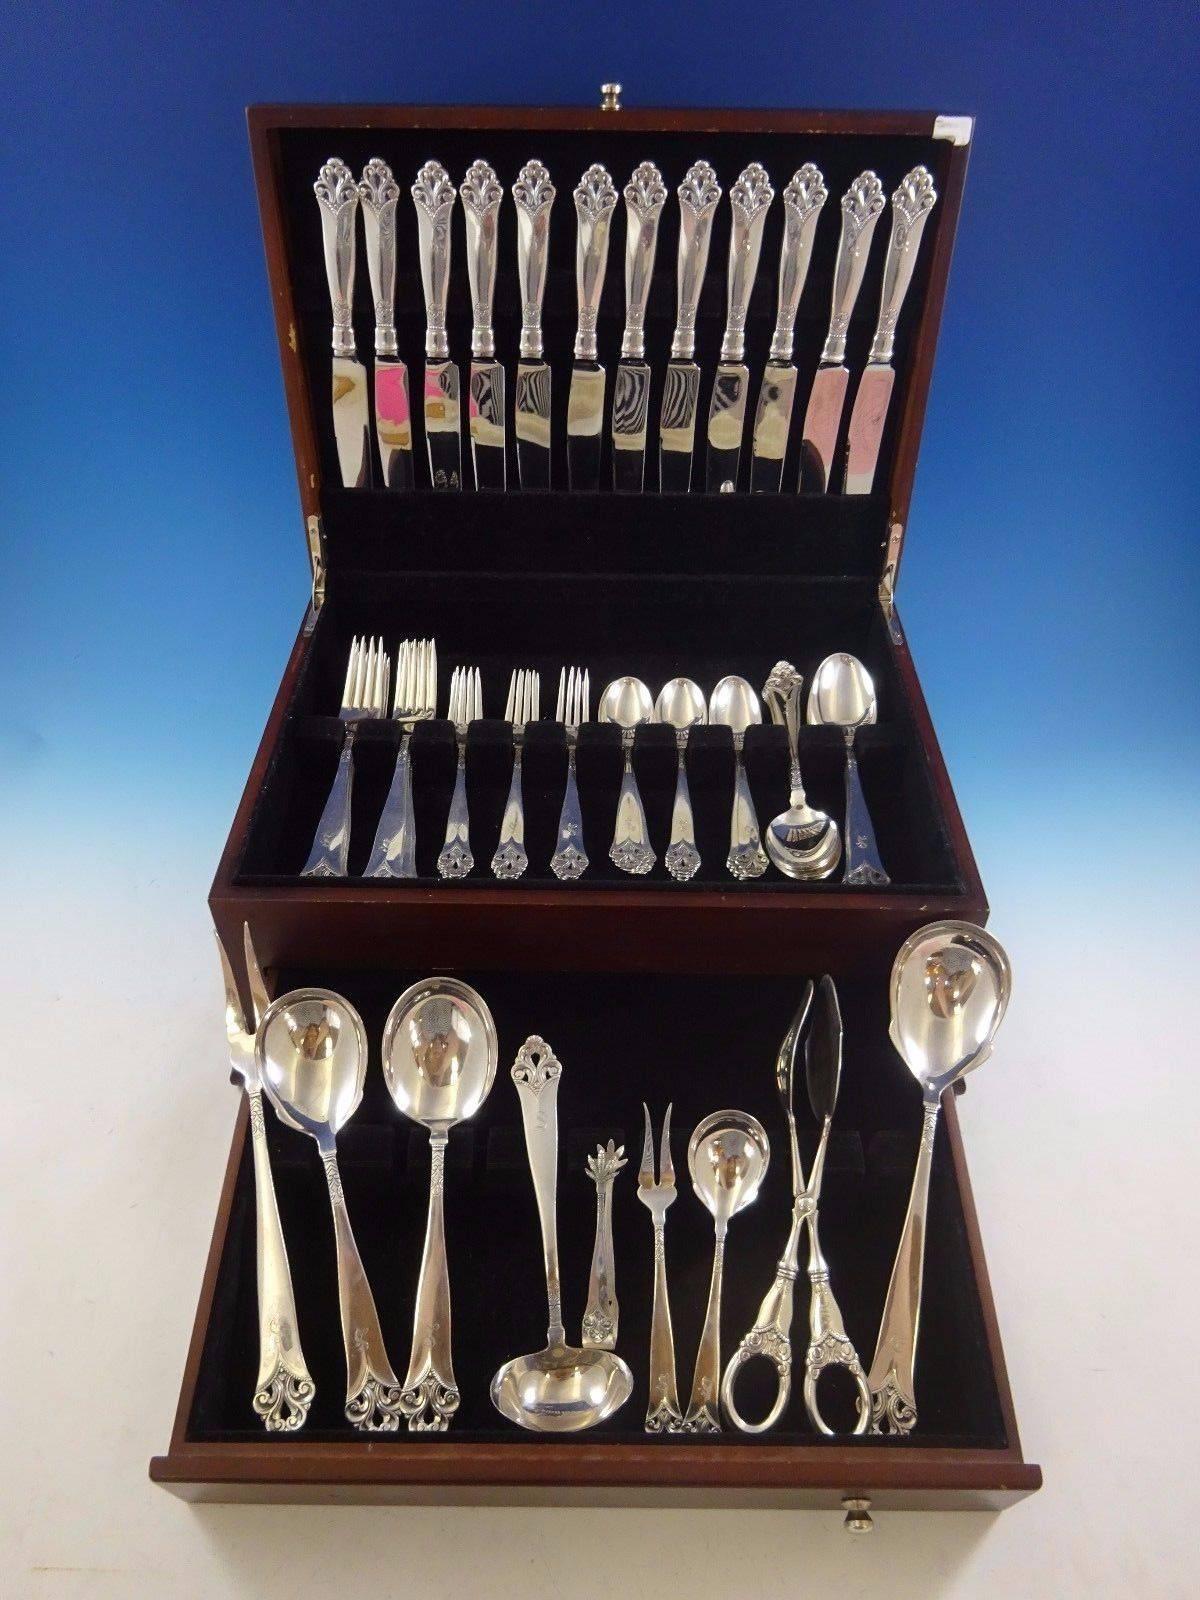 Lillemor by Marthinsen sterling silver dinner size flatware set of 69 pieces. This set includes:

12 dinner size knives, 9 5/8